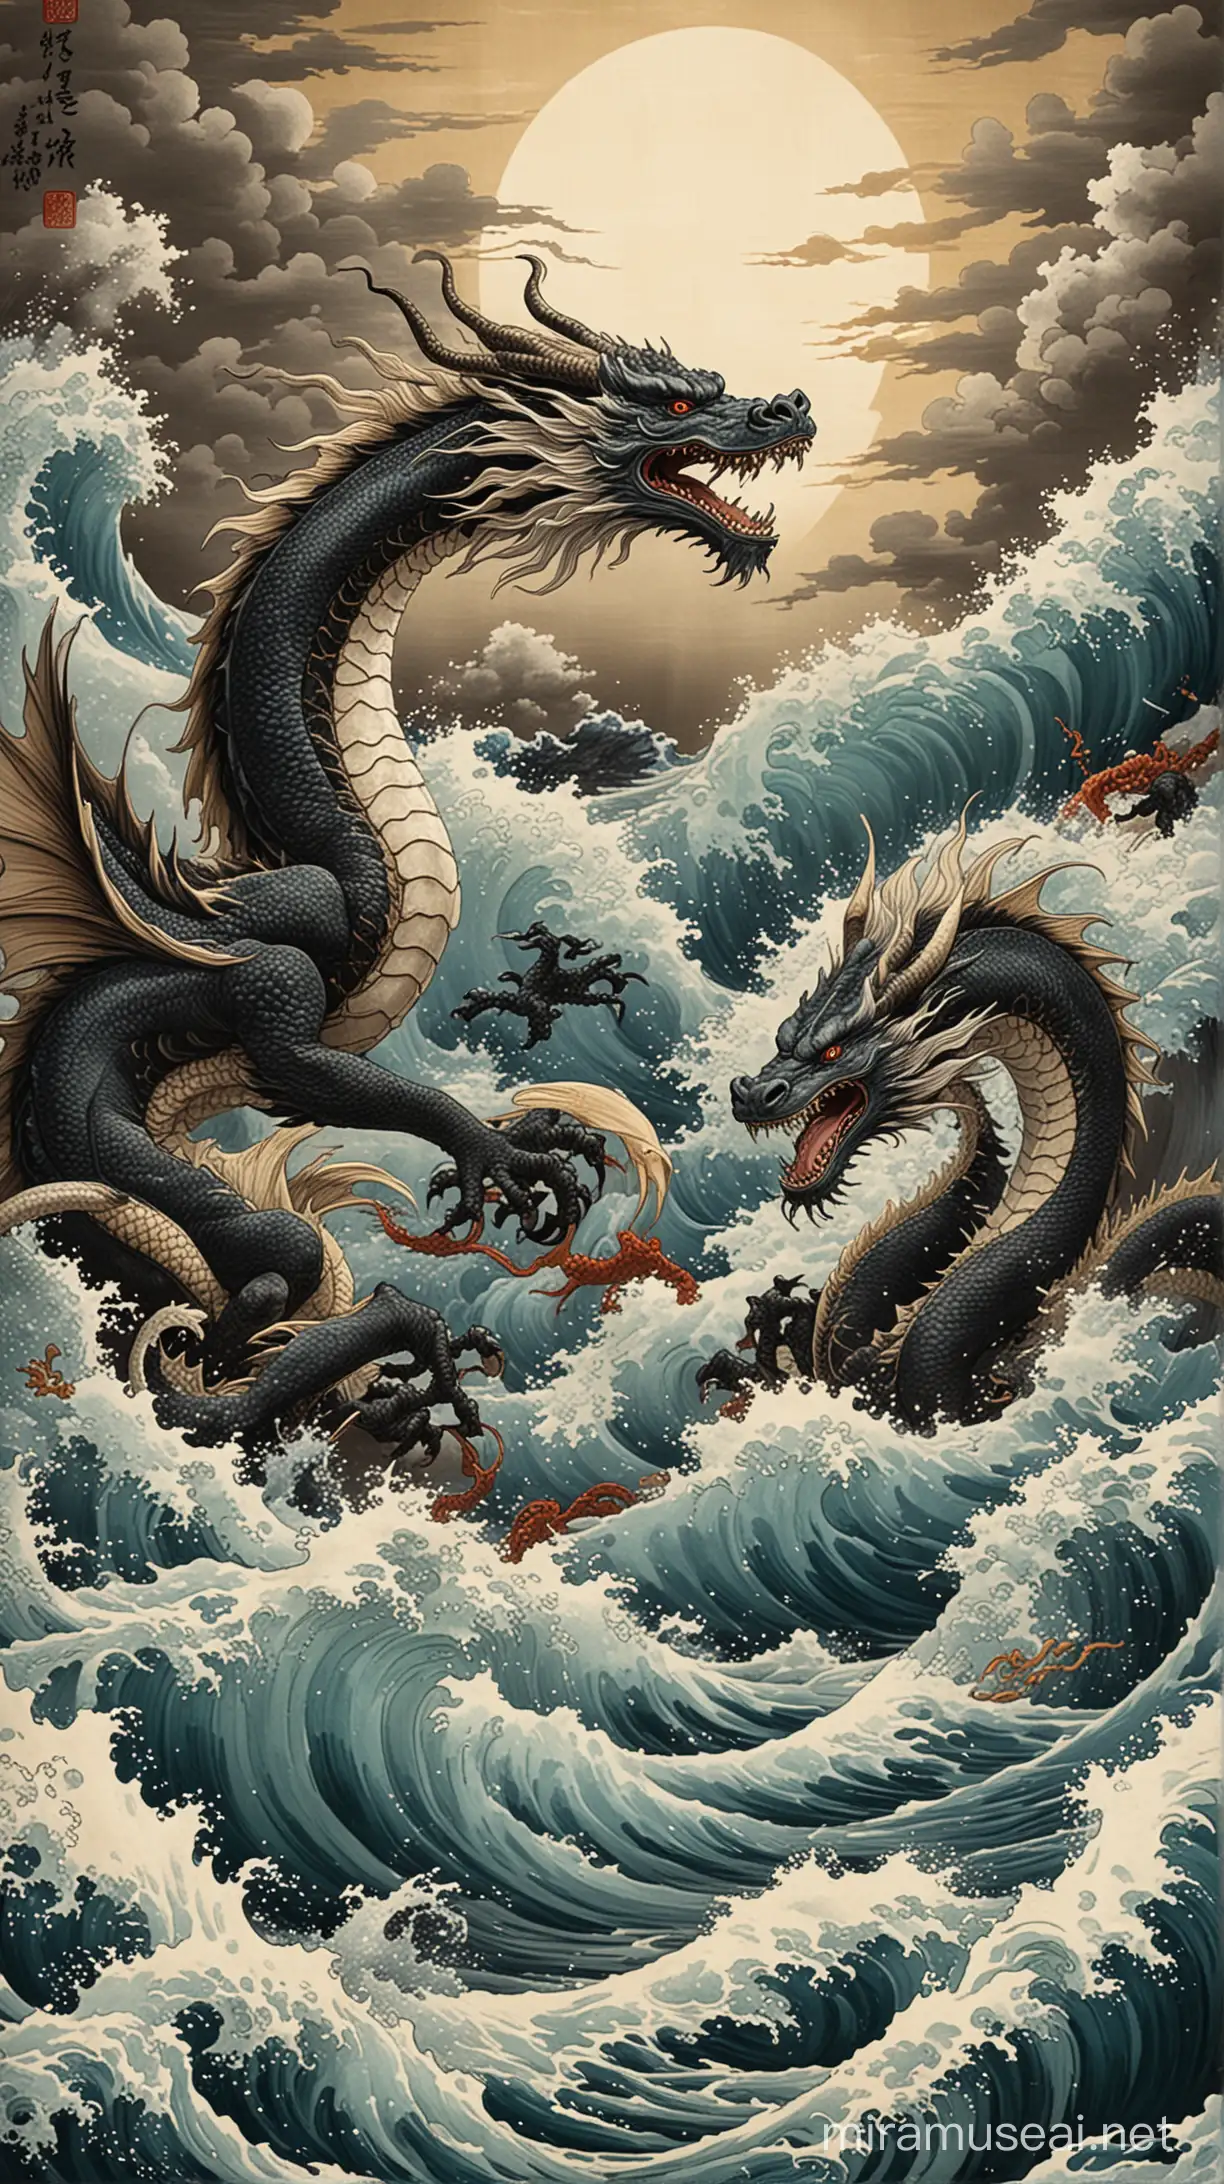 The battle of the black dragon at the top of the frame with the winged white dragon that emerged from the waves at the bottom of the frame. Hokusai style painting. Chinese dragons with long and slender bodies